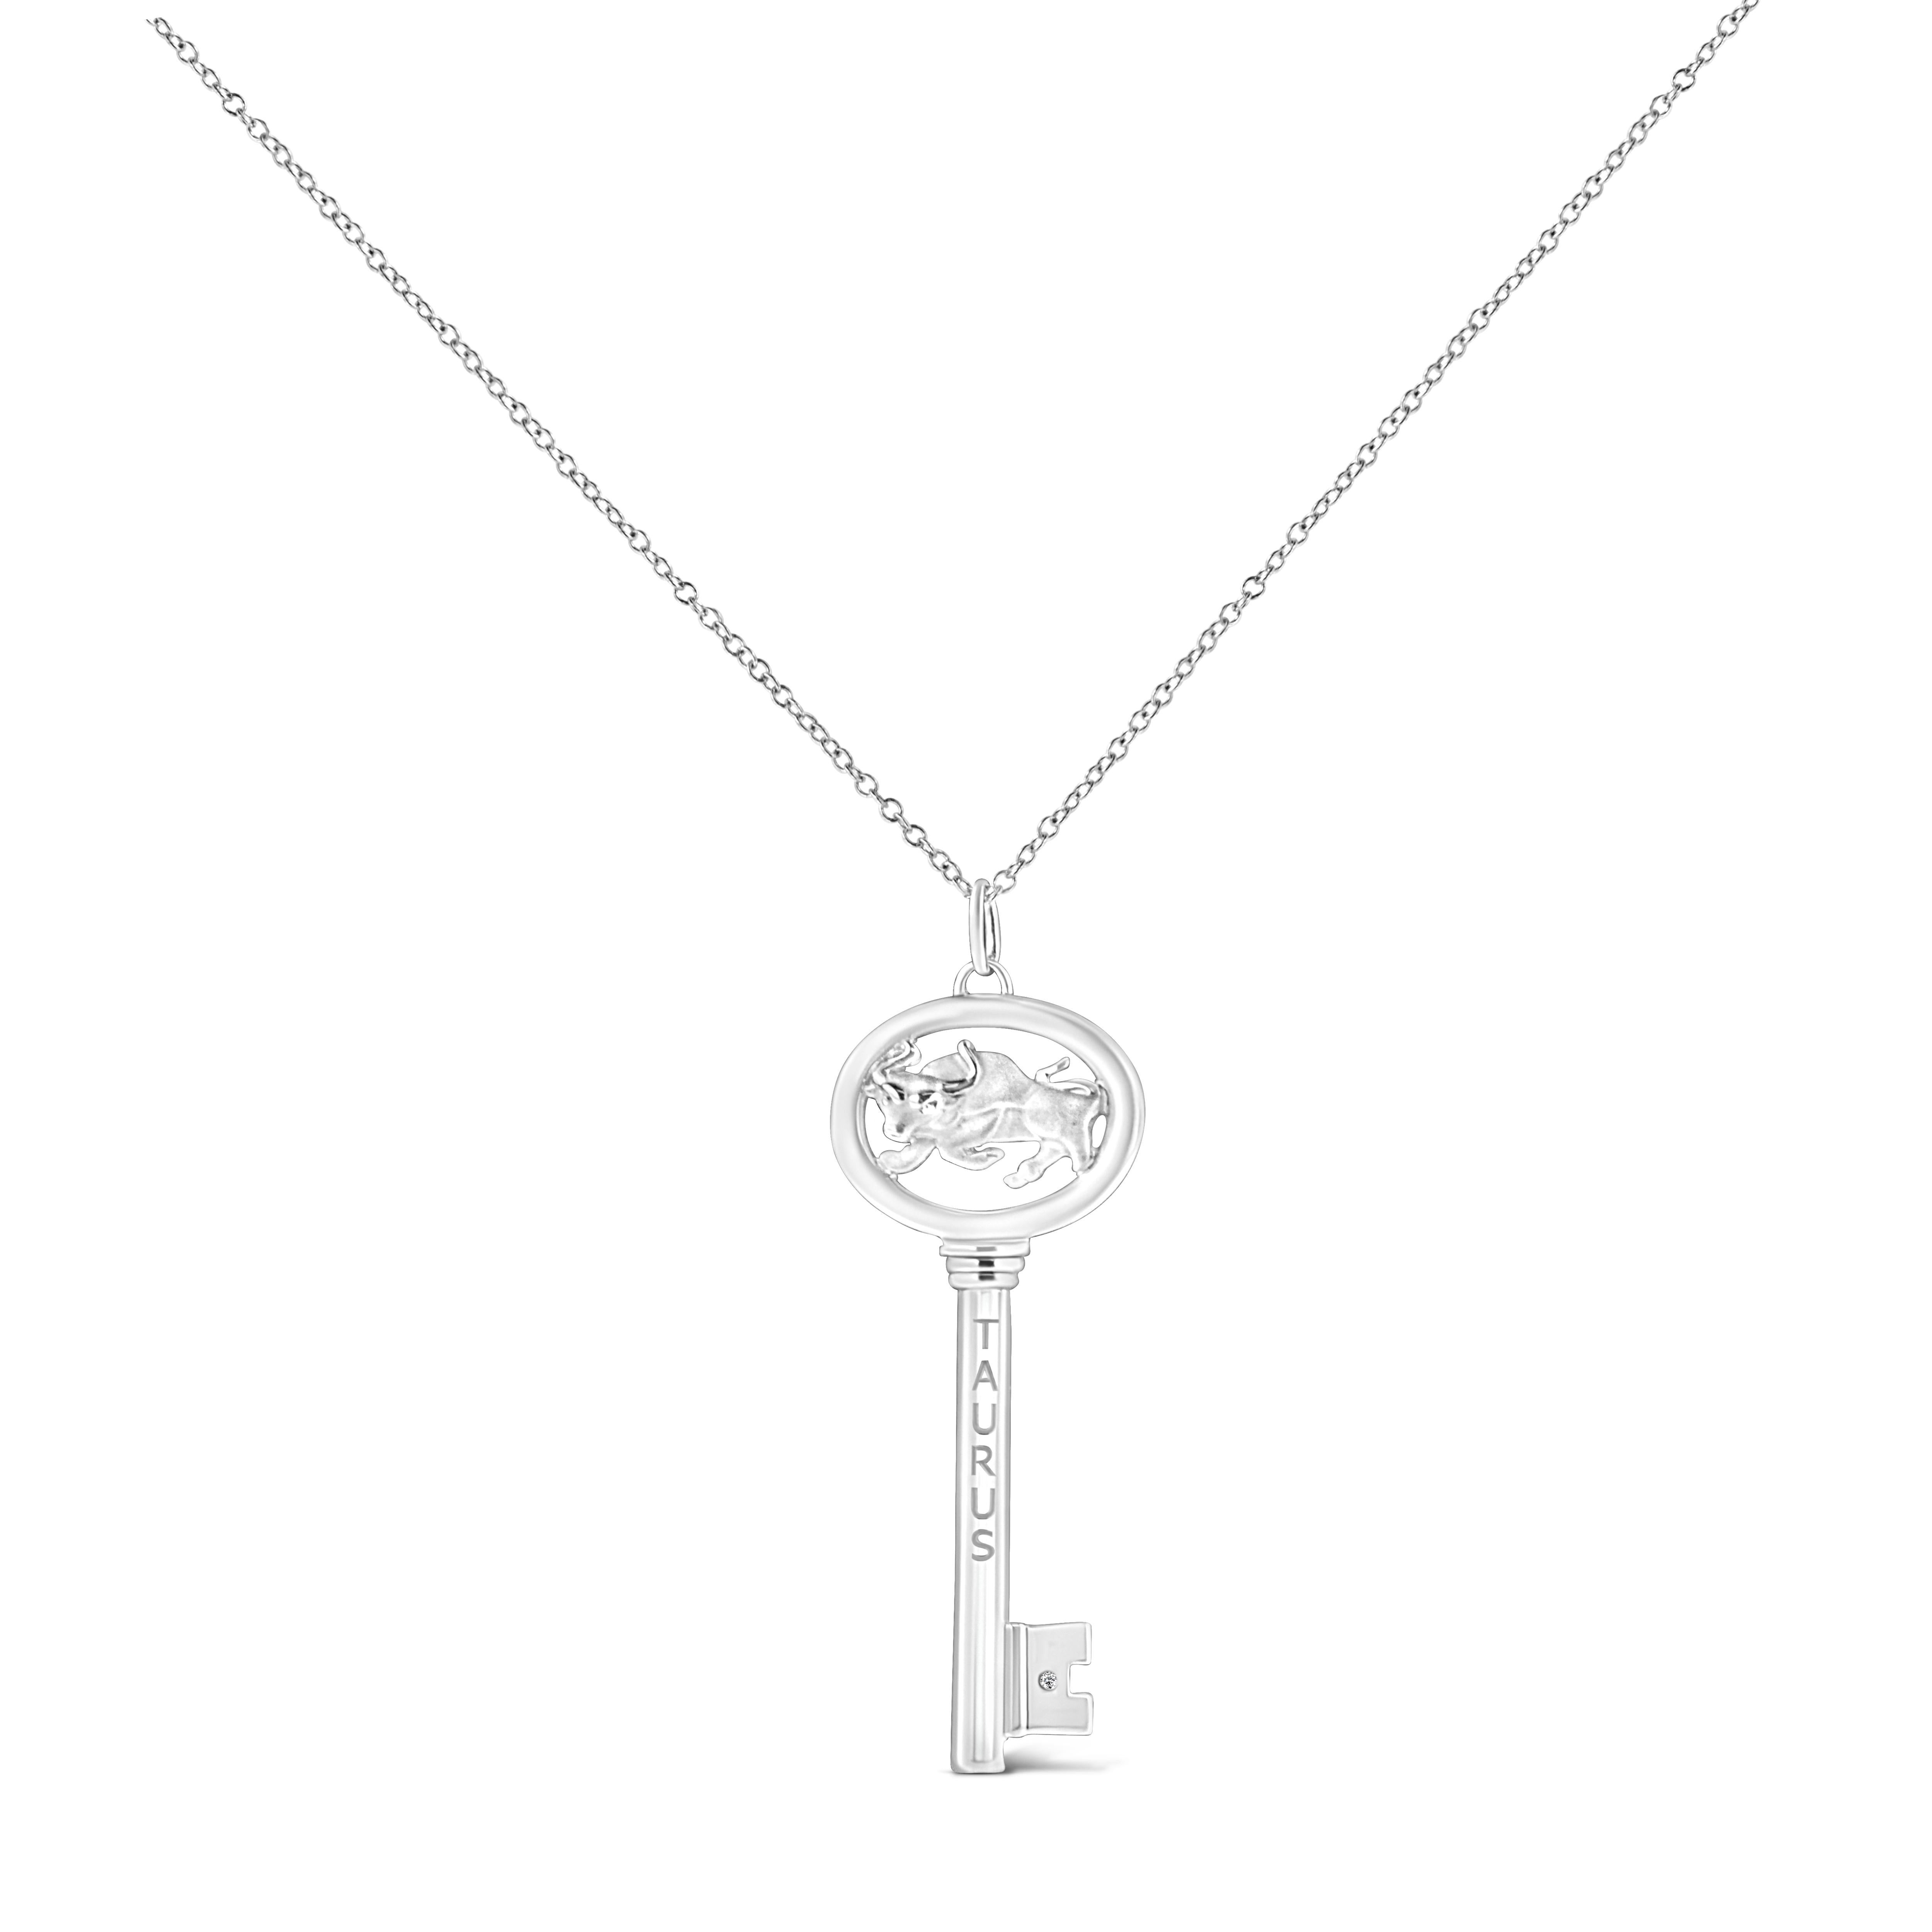 It's as if the stars aligned to create this stunning .925 Sterling Silver necklace flaunting a Taurus zodiac pendant accented by a glimmering bezel set natural diamond. Brilliant beacons of optimism and hope, our Zodiac Keys are radiant symbols of a